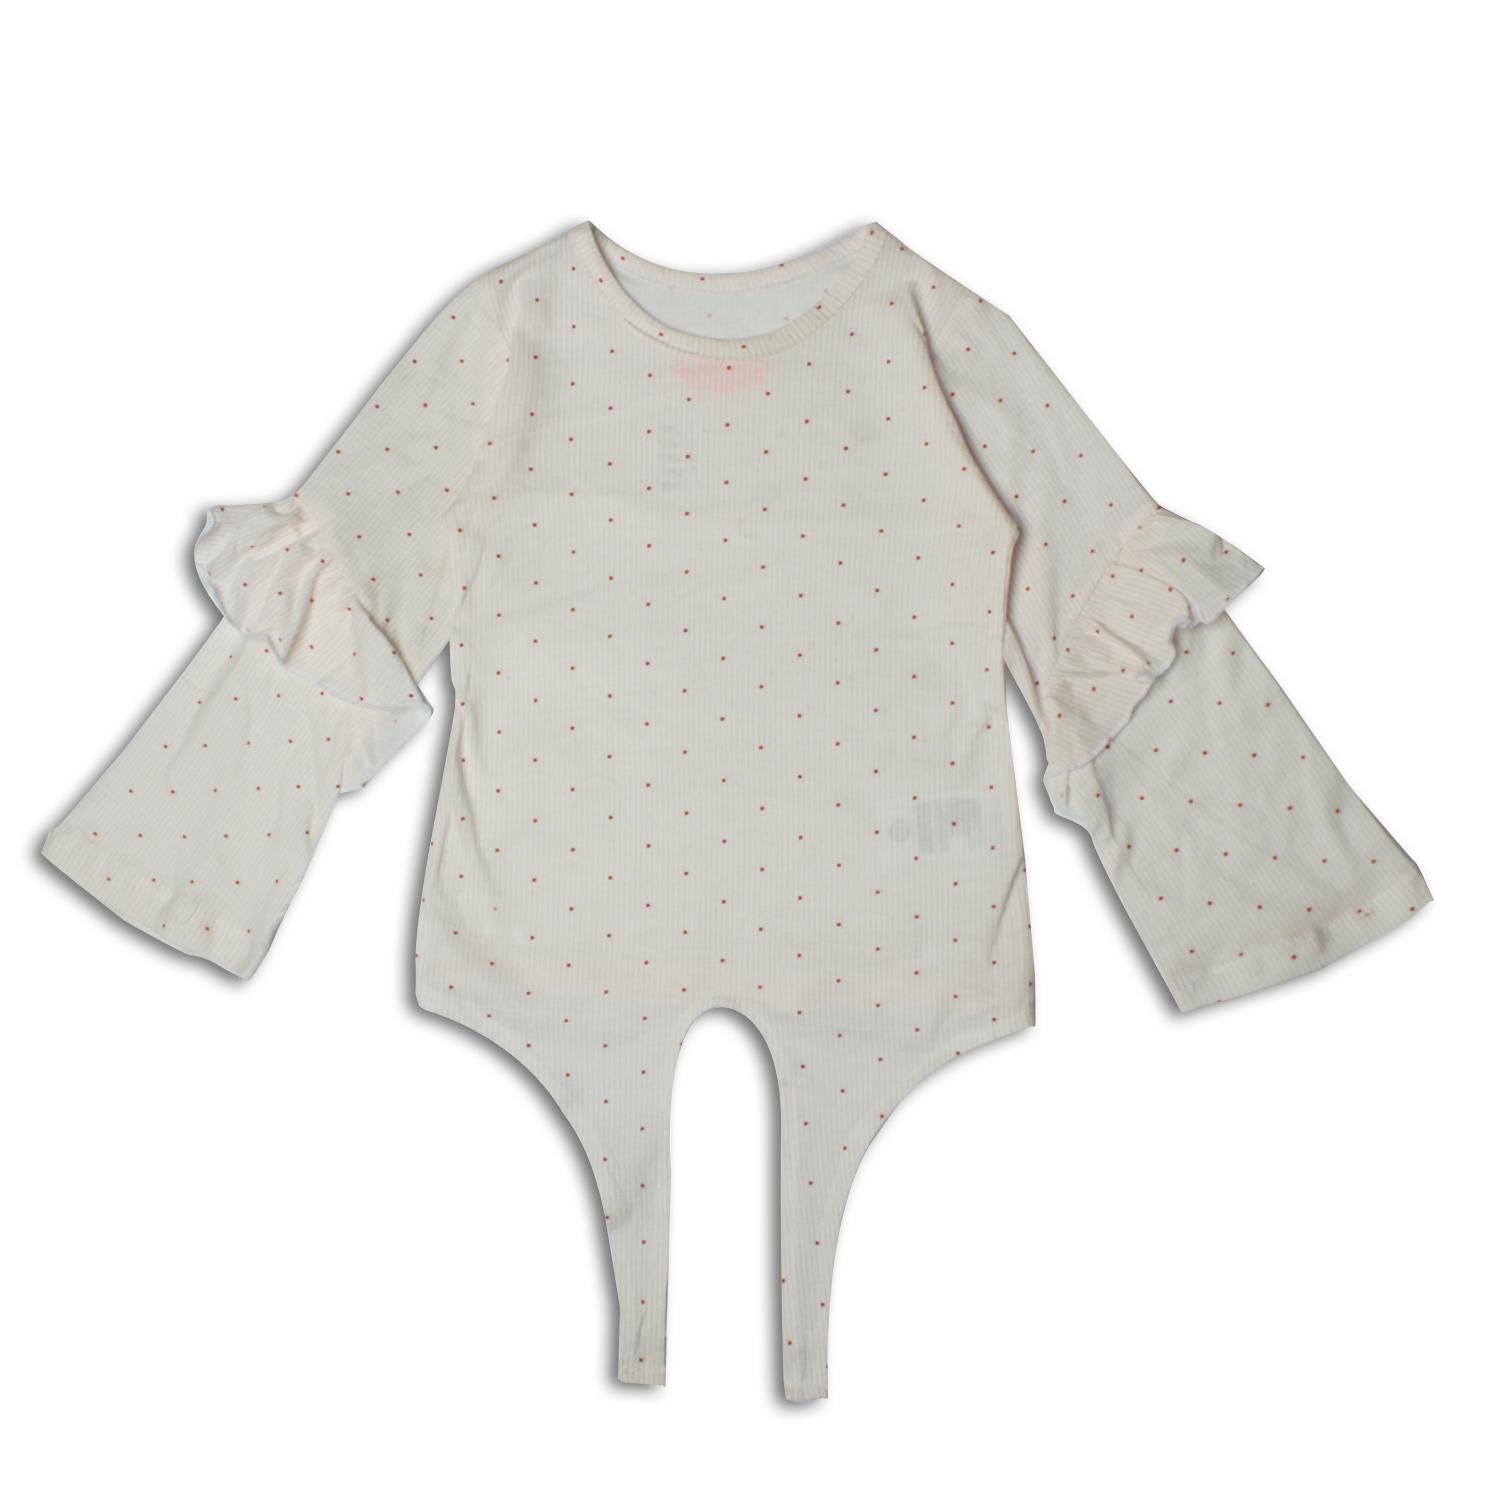 BABY PINK FULL SLEEVES POLKA DOTS PRINTED TOP FOR GIRLS